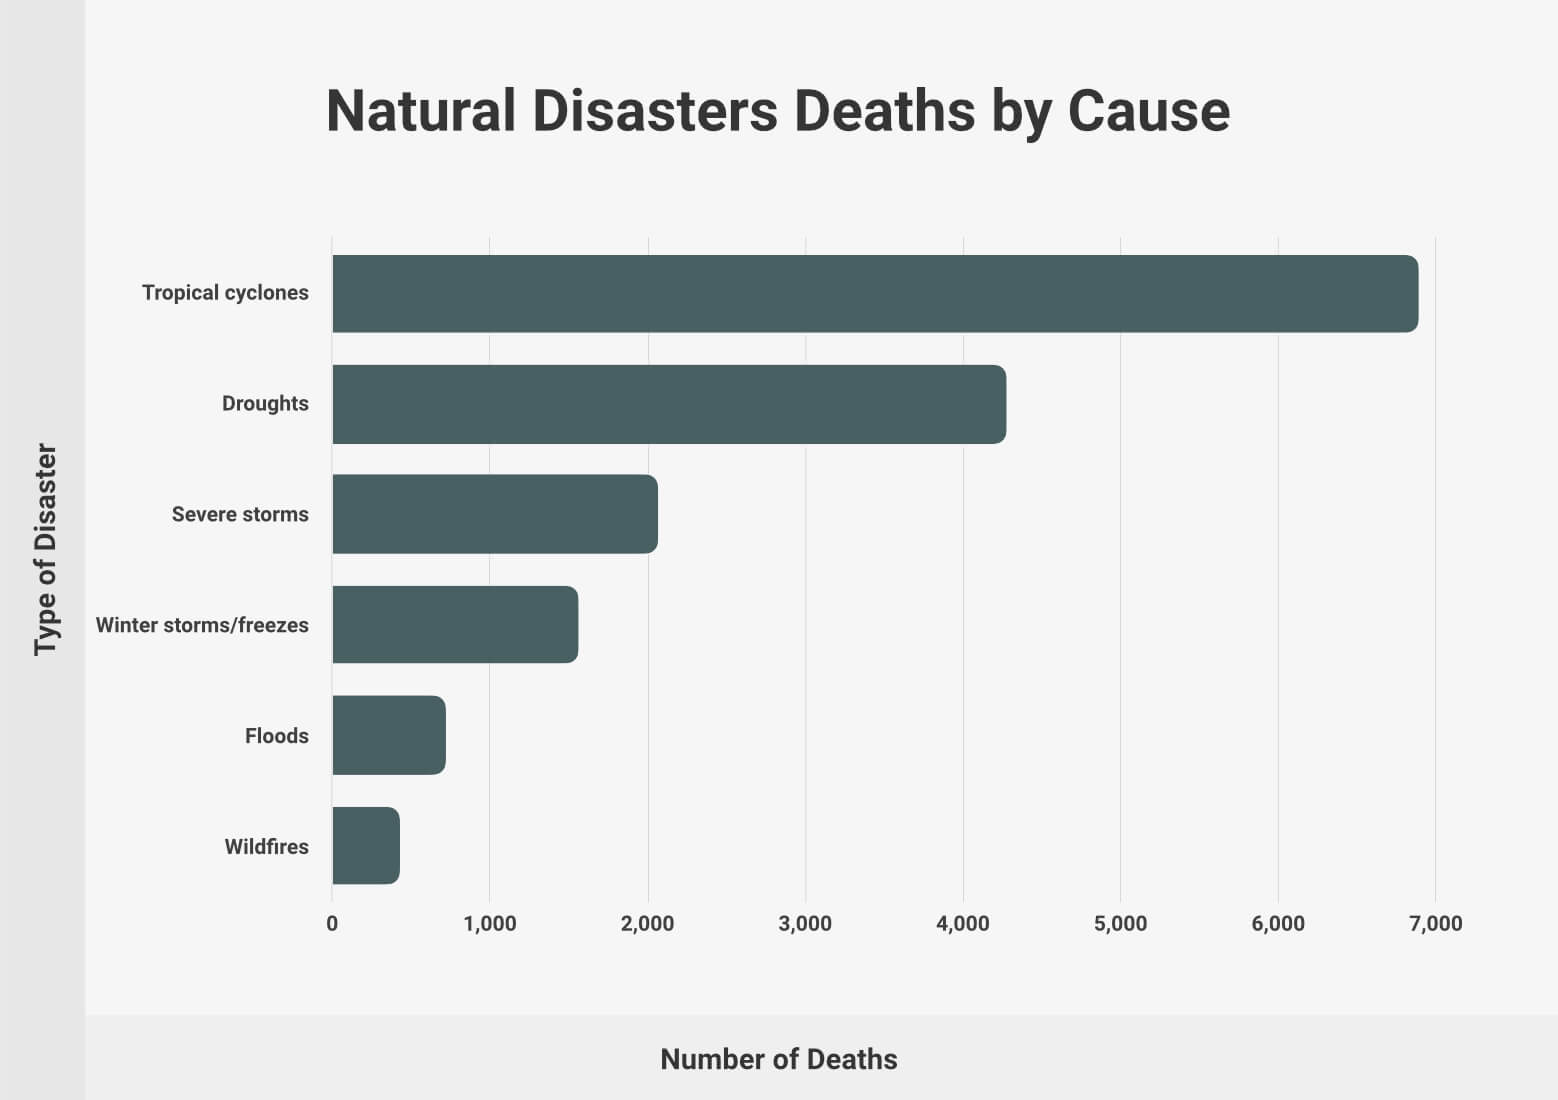 Number of Natural Disasters Deaths by Cause